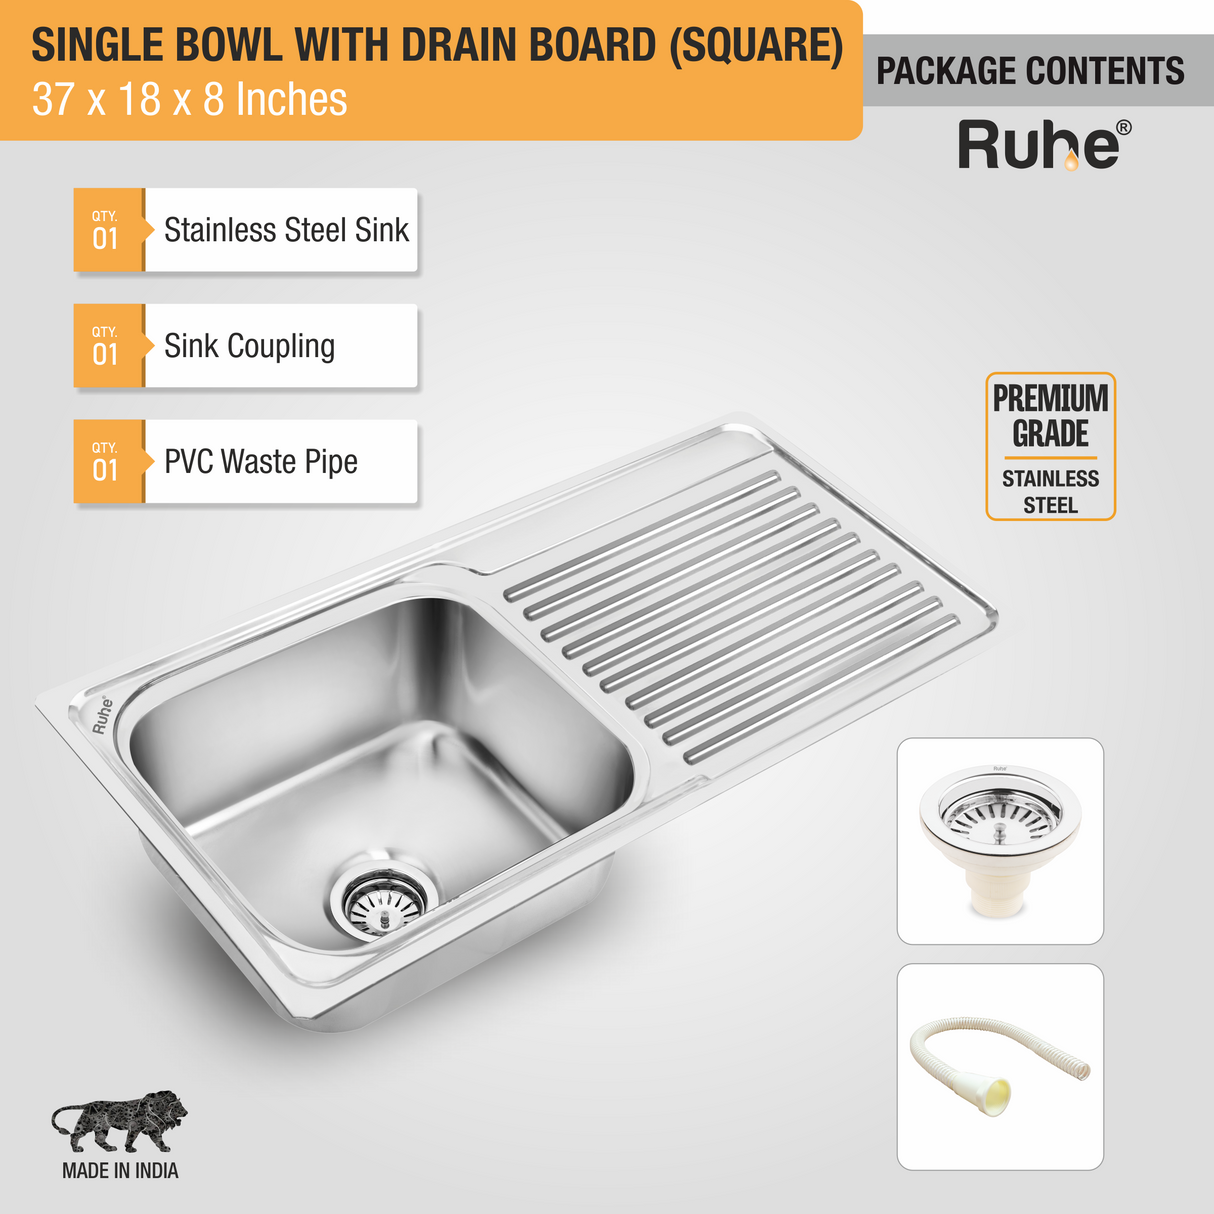 Square Single Bowl (37 x 18 x 8 Inches) Premium Stainless Steel Kitchen Sink with Drainboard package content